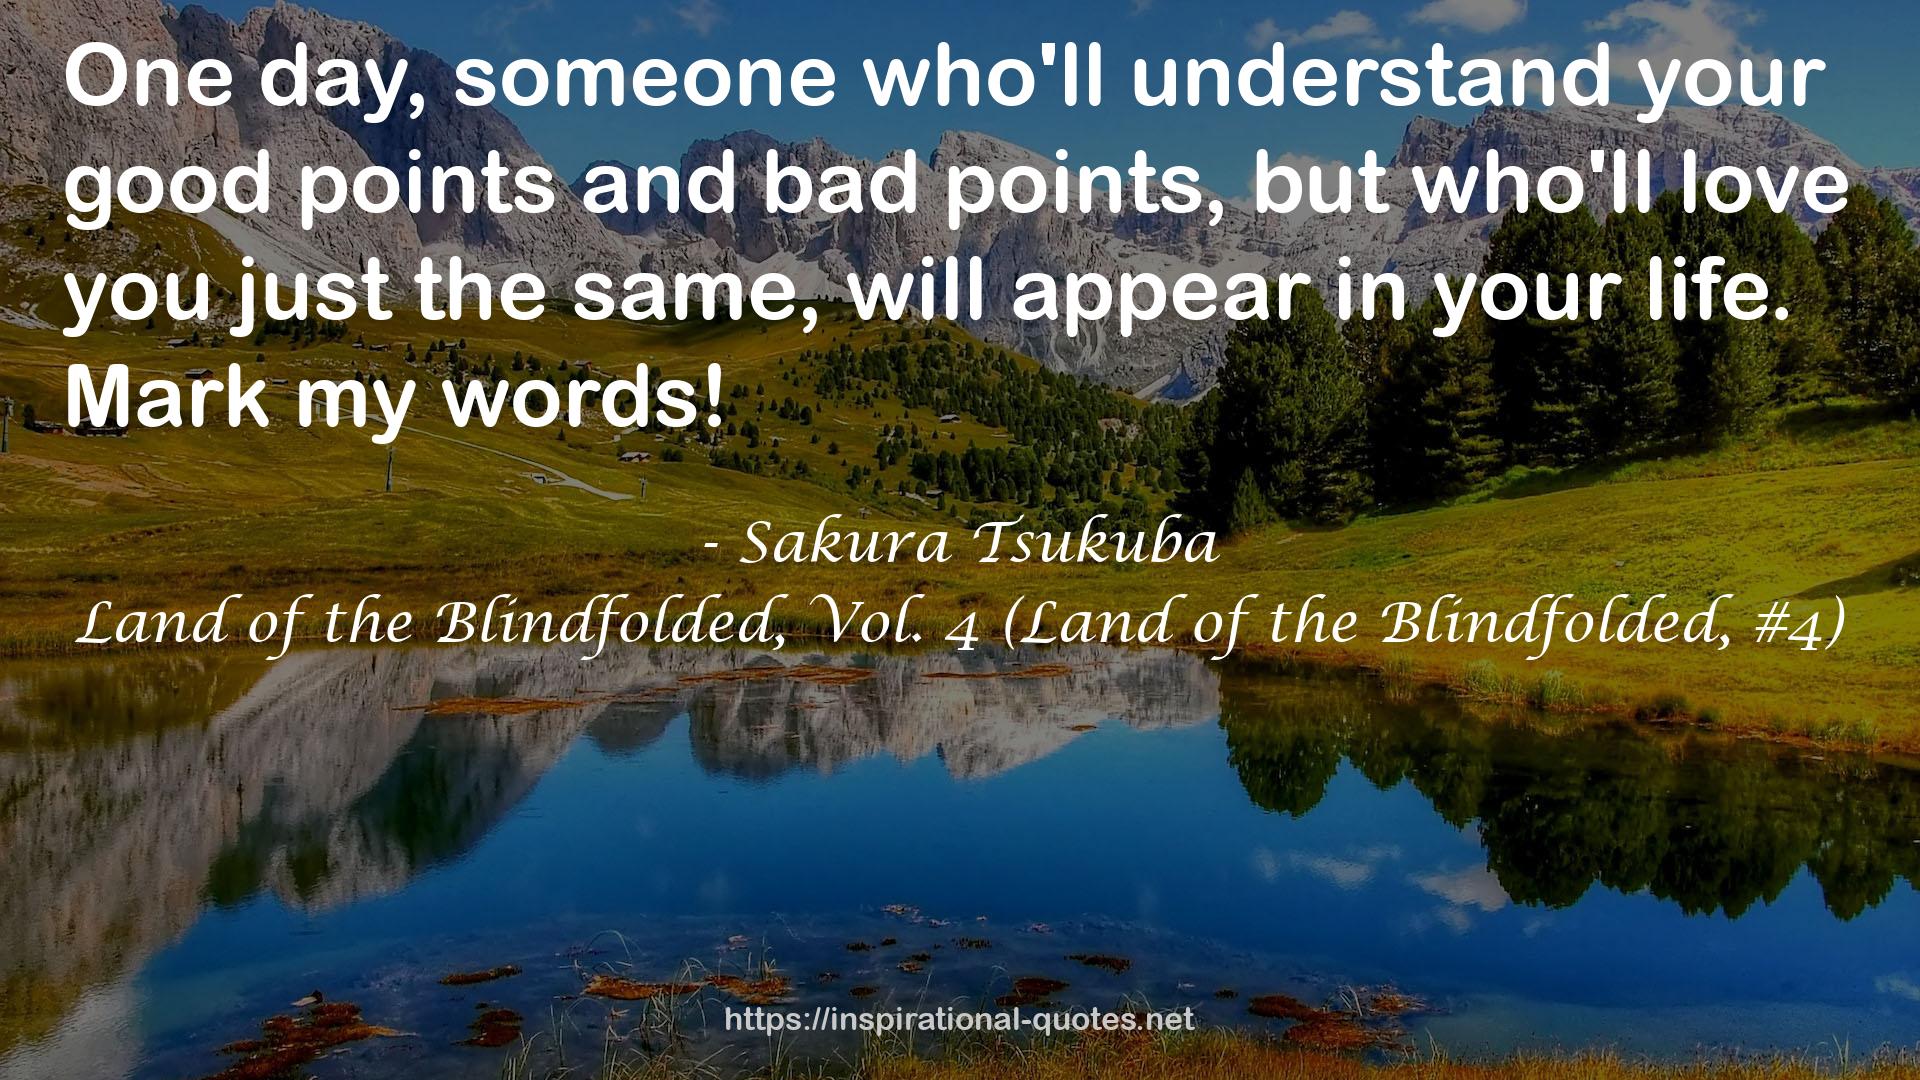 Land of the Blindfolded, Vol. 4 (Land of the Blindfolded, #4) QUOTES